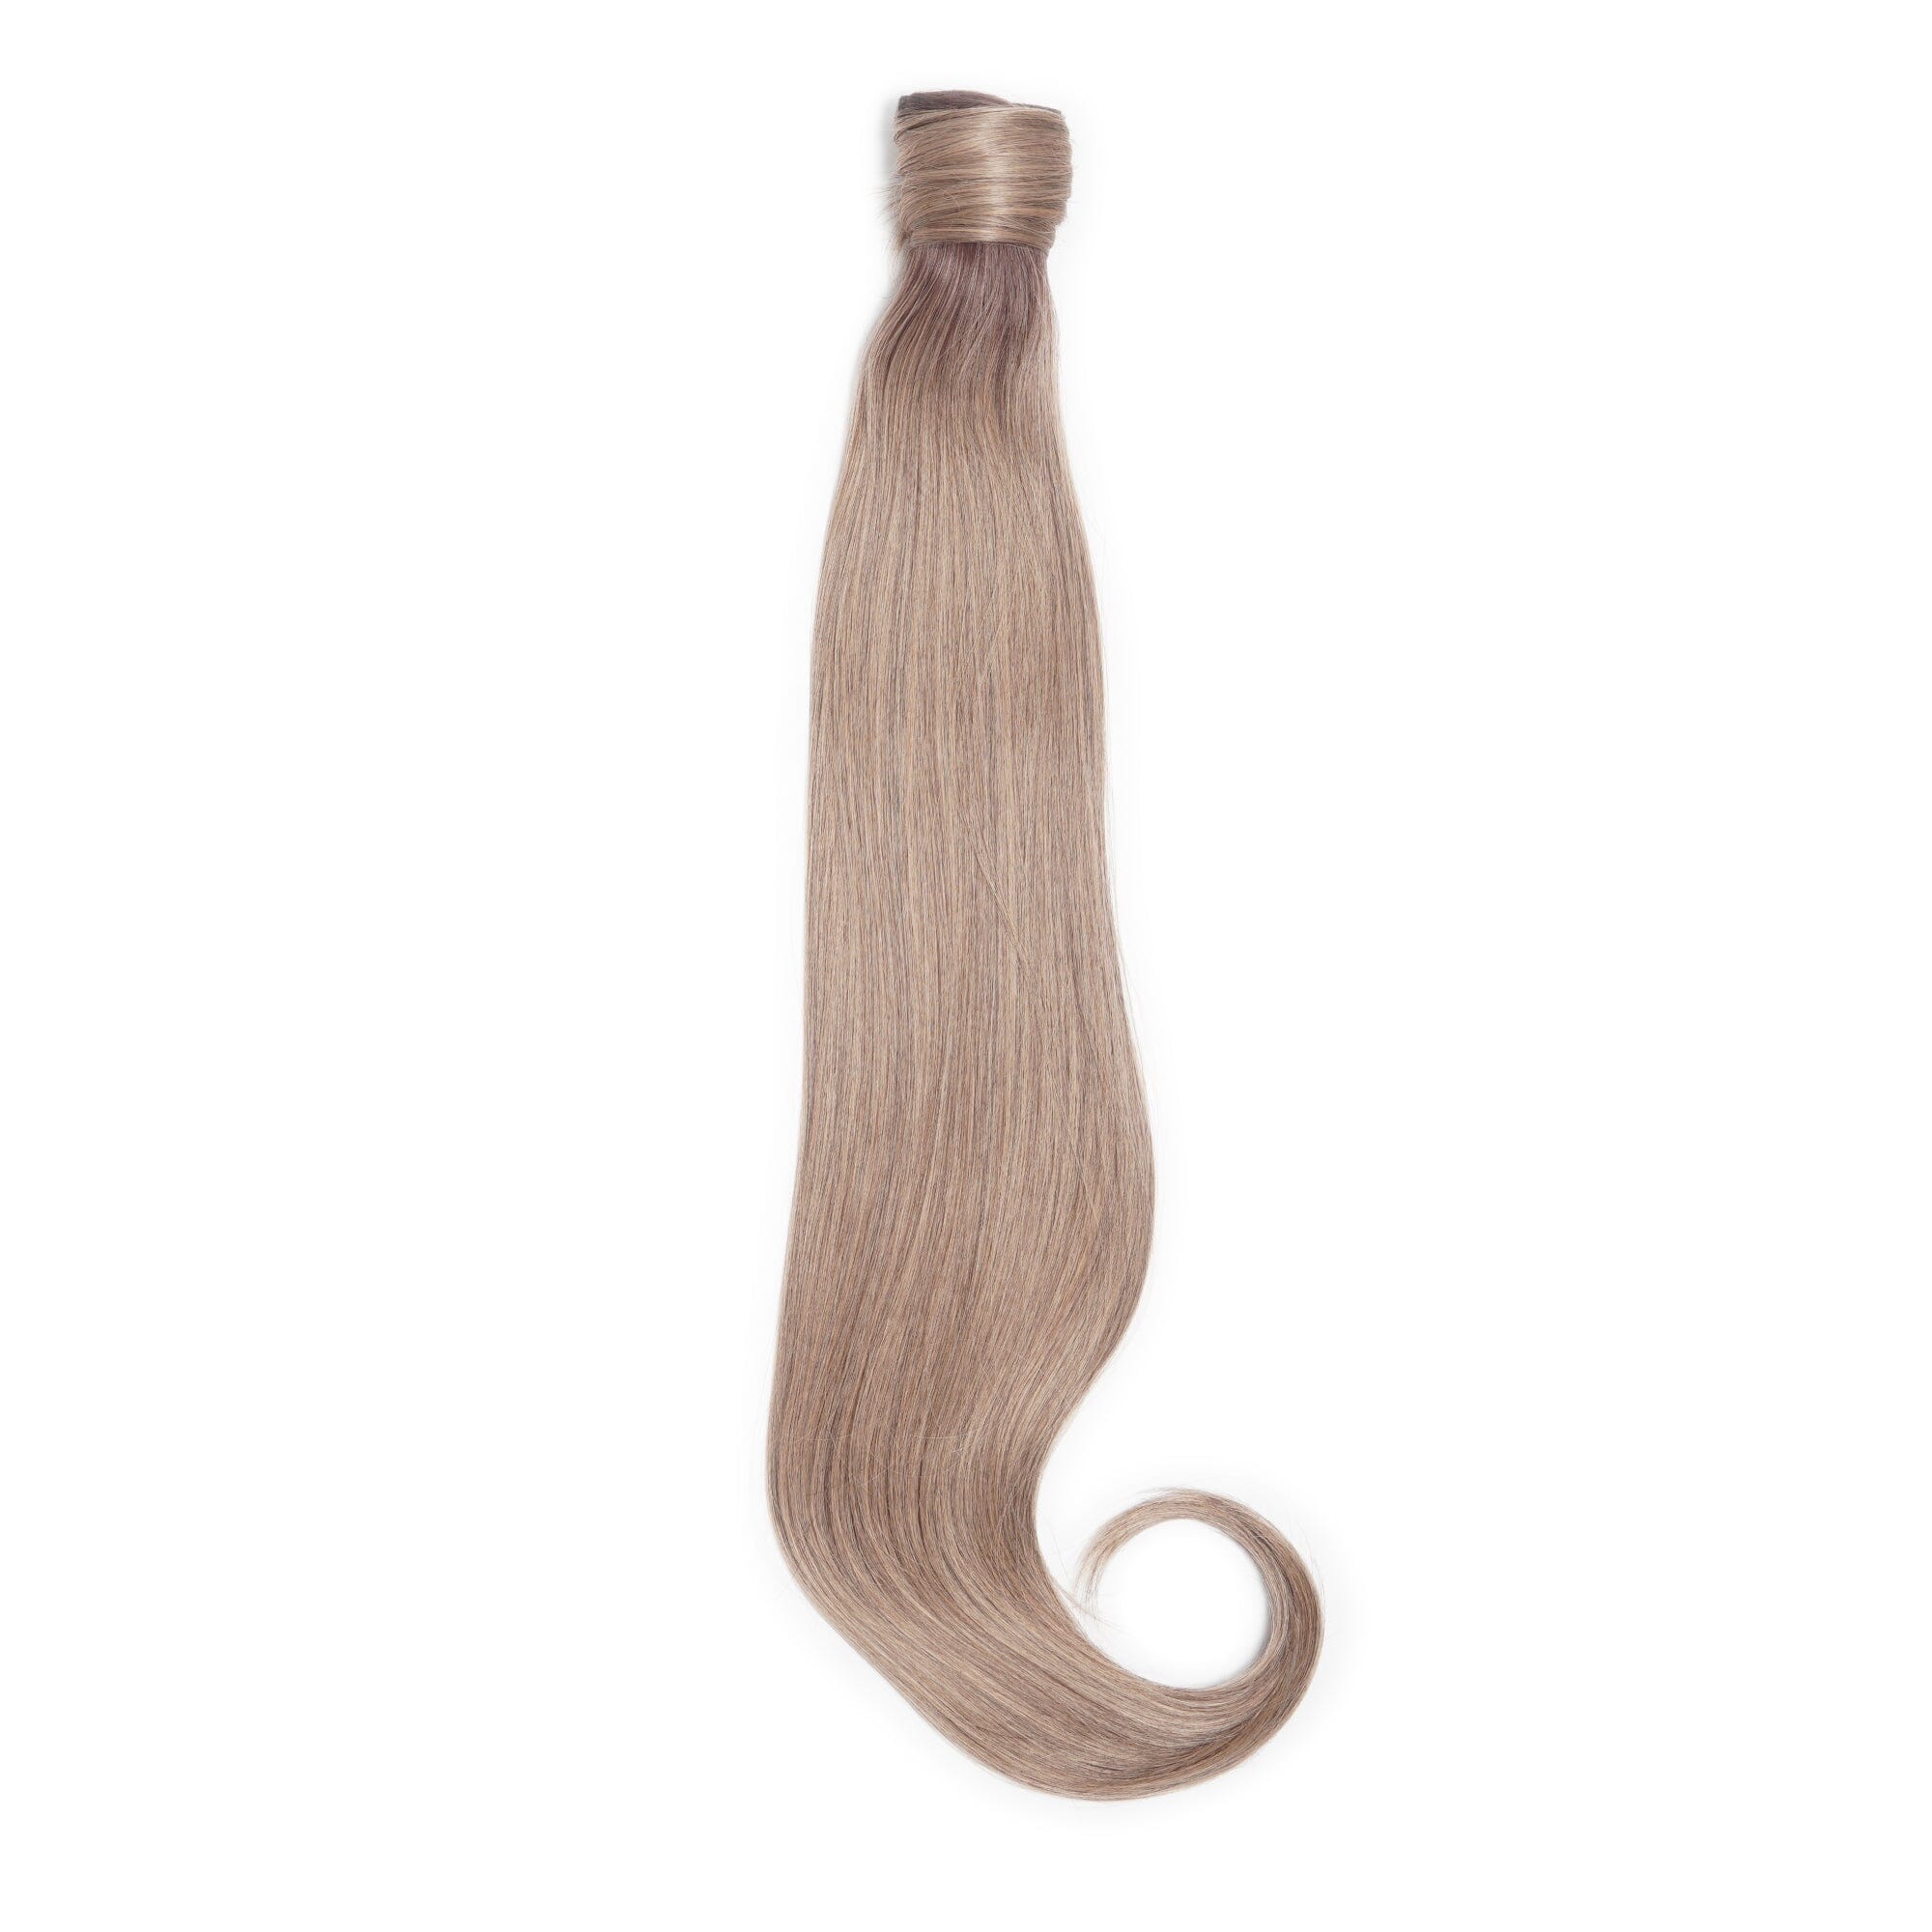 Long Clip-In Ponytails (22" - 30") Clip In Ponytail Easilocks 26" Silky Straight Bouncy Ponytail Honey Balayage 